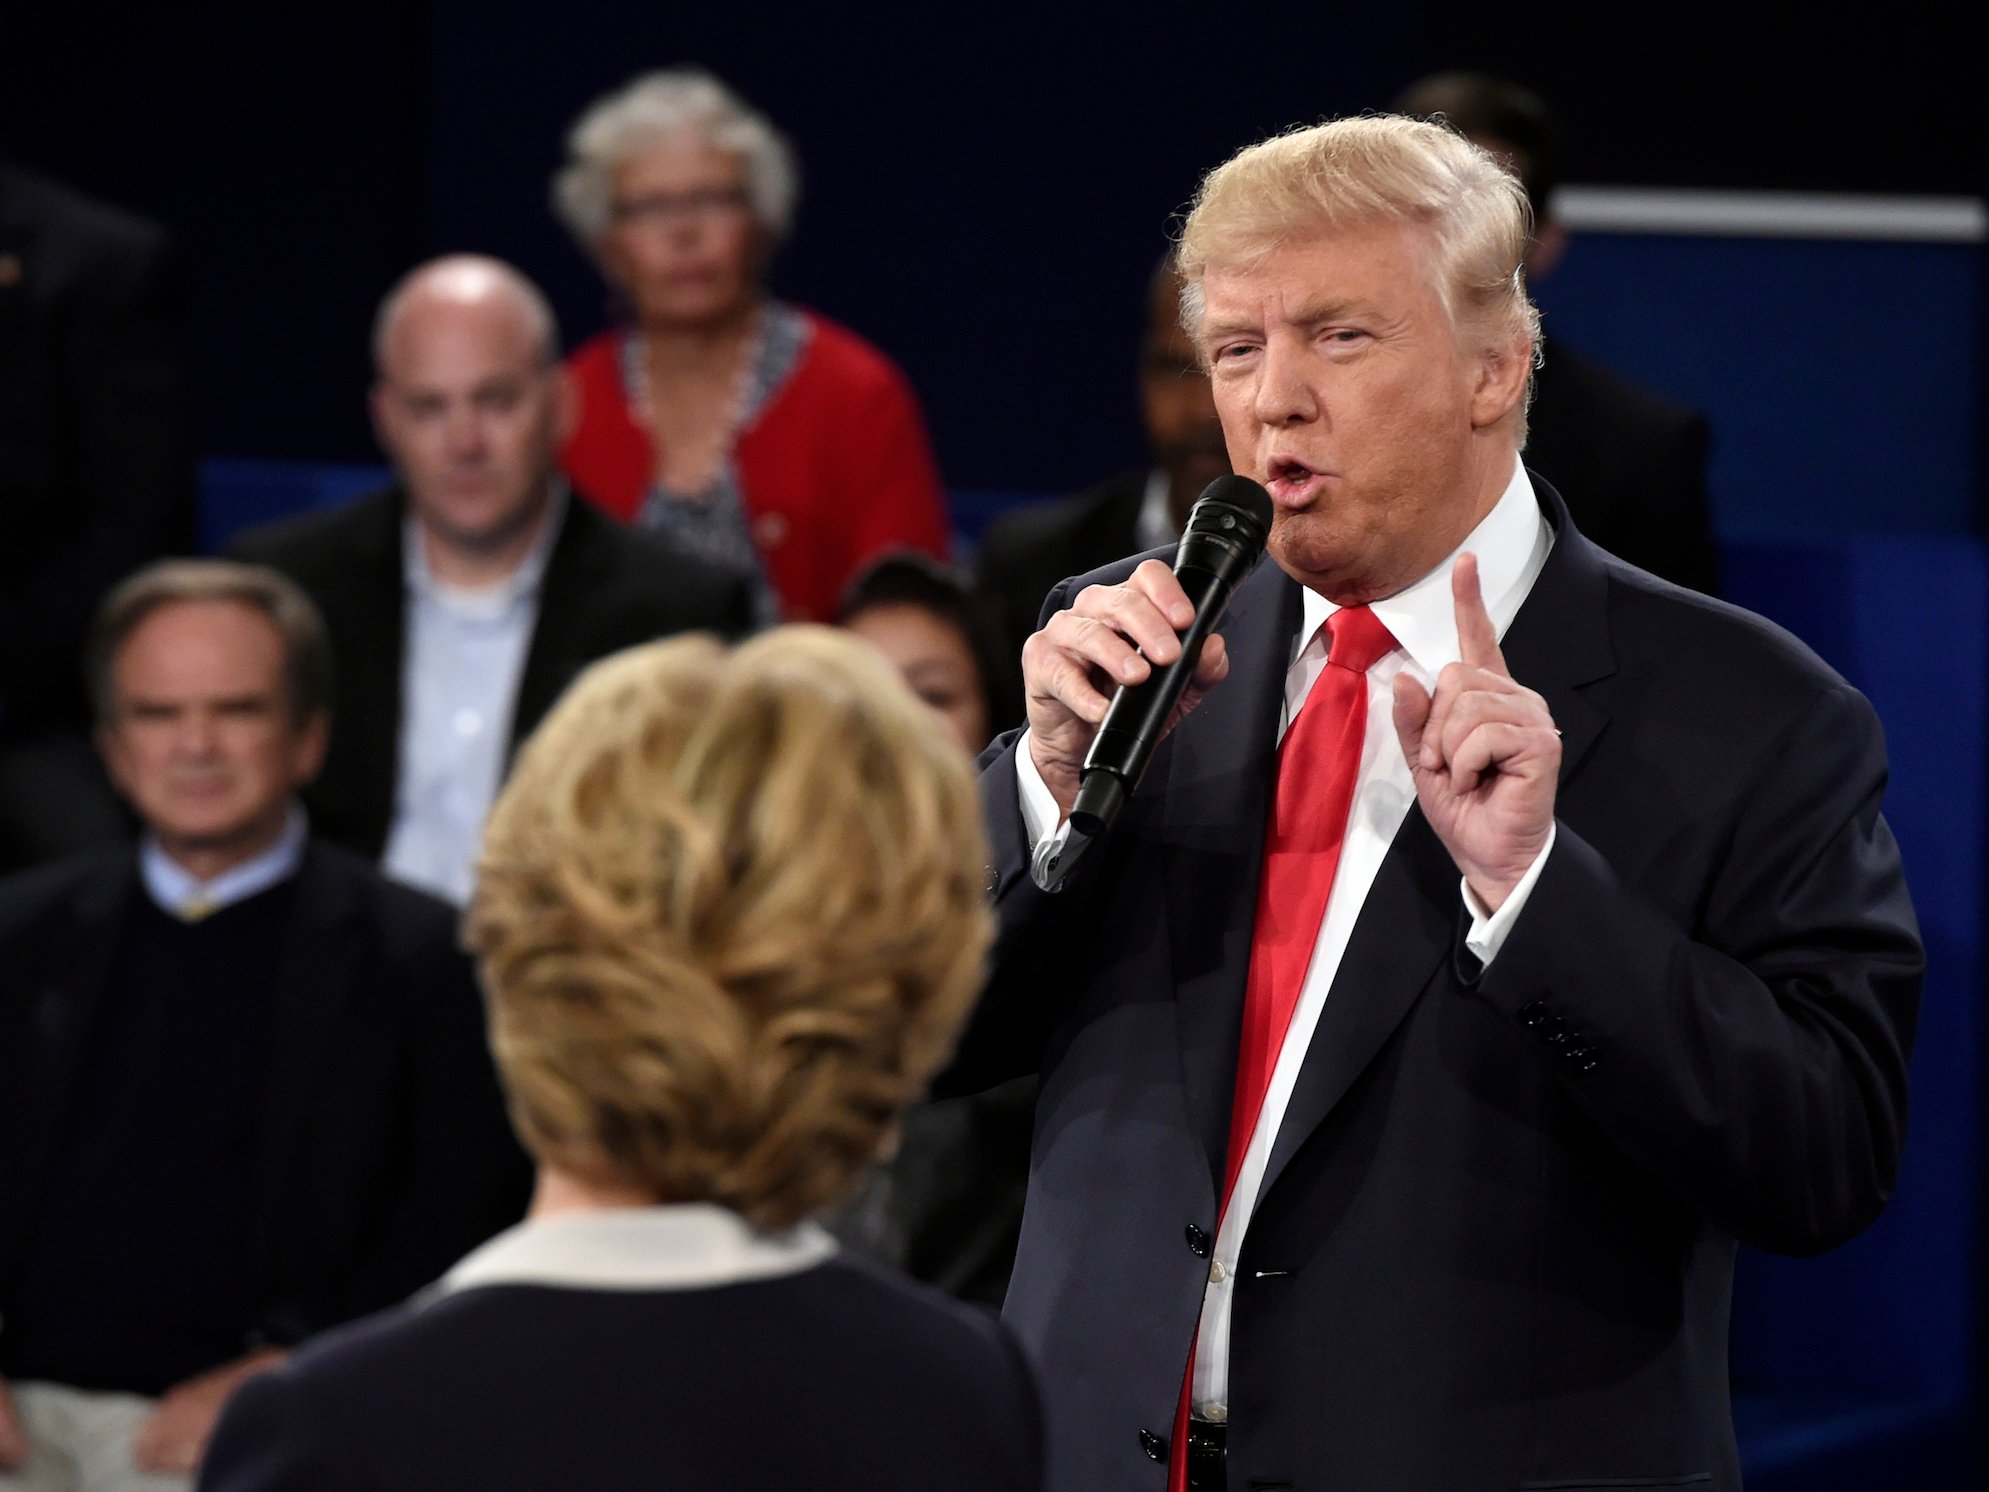 Donald Trump challenges Hillary Clinton to drug test